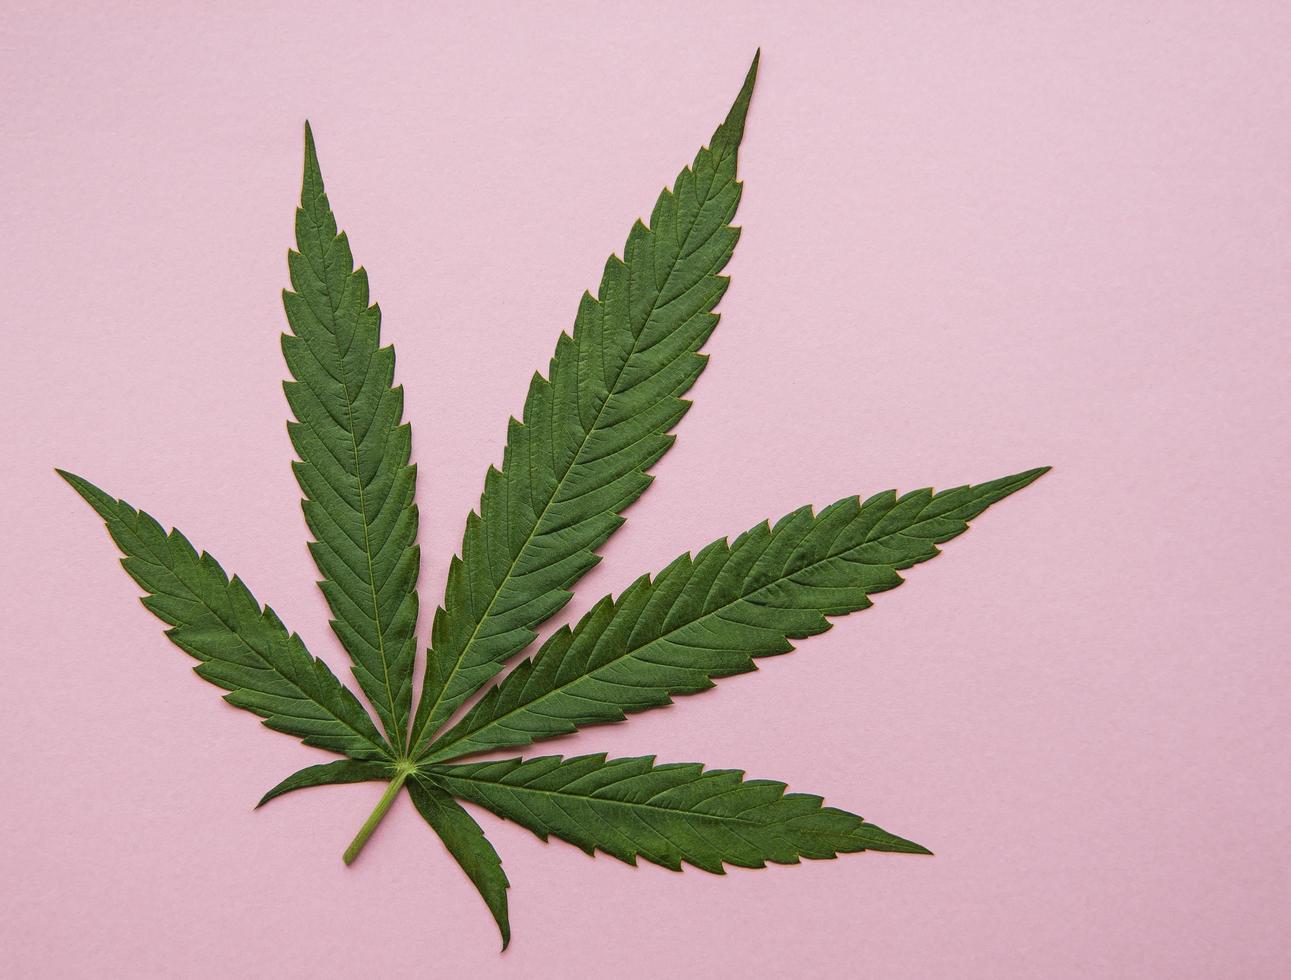 Green cannabis leaves on pink background photo